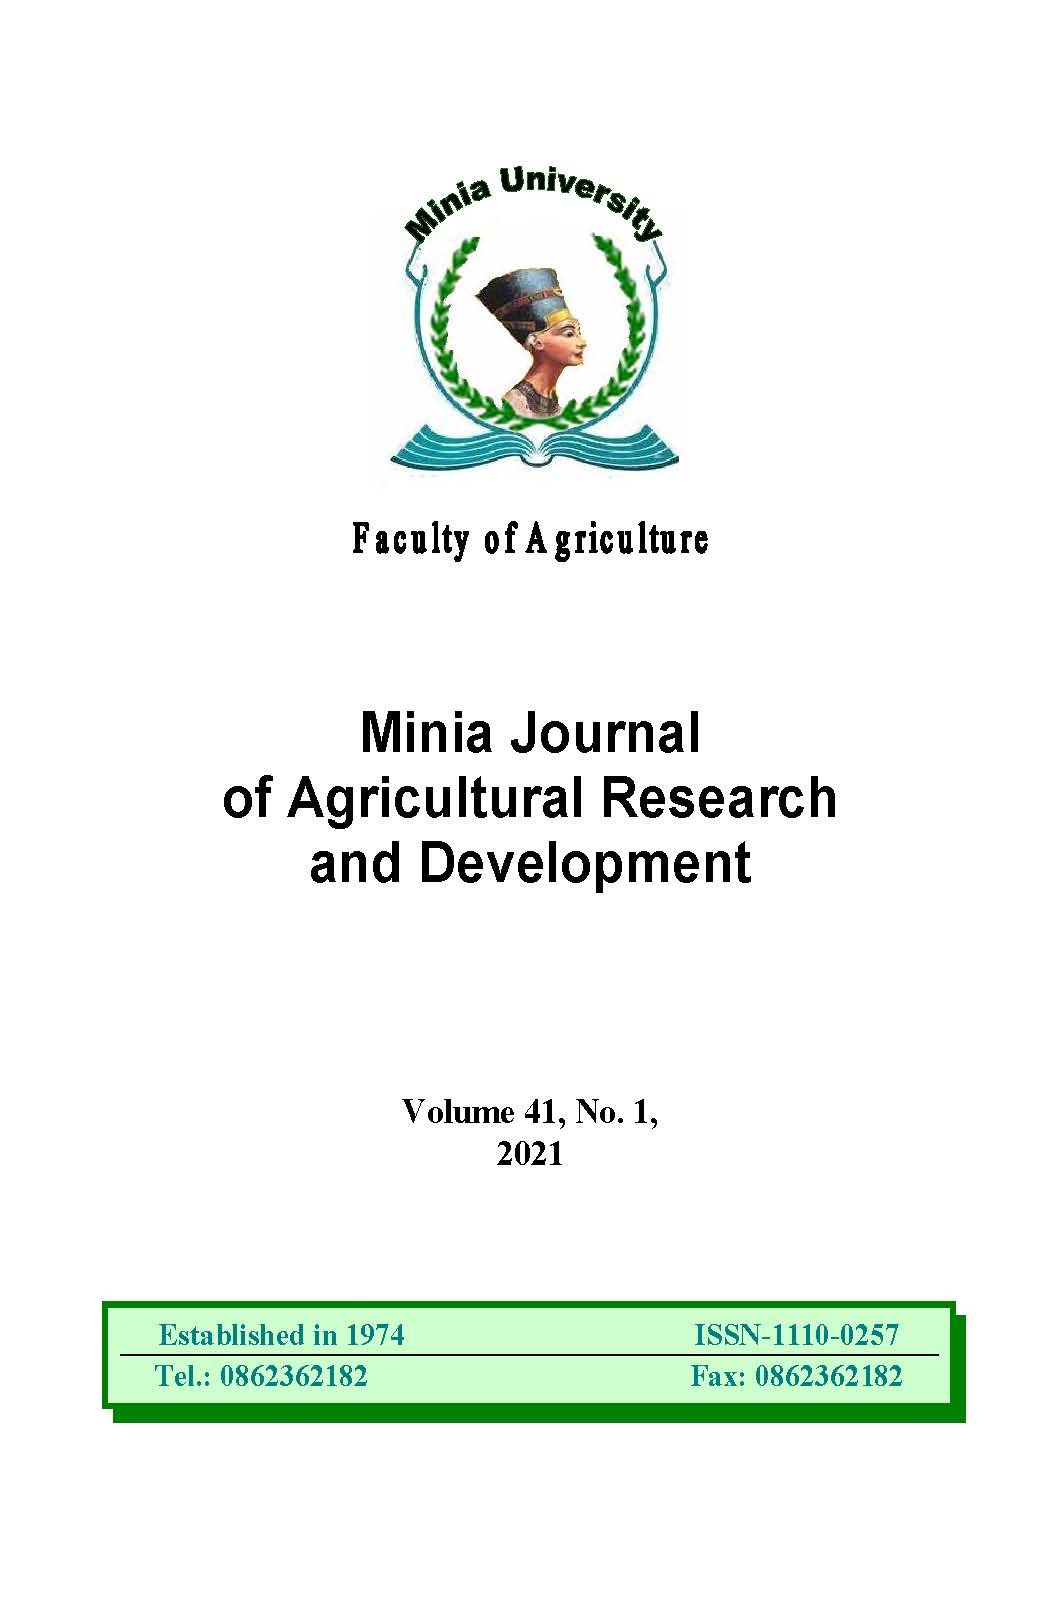 Minia Journal of Agricultural Research and Development